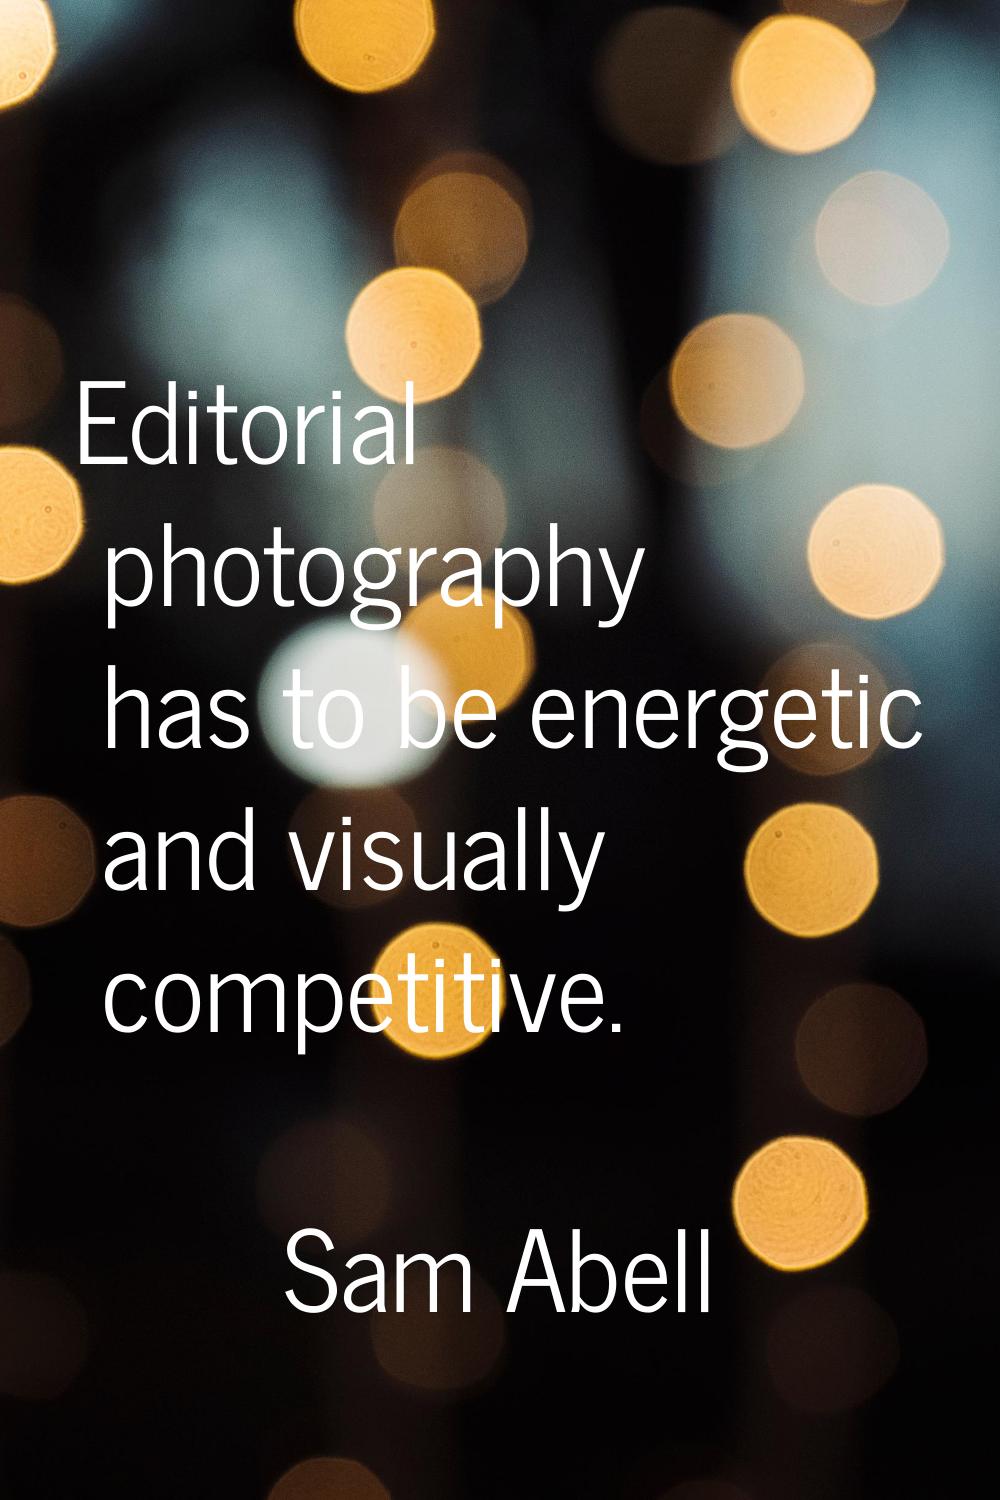 Editorial photography has to be energetic and visually competitive.